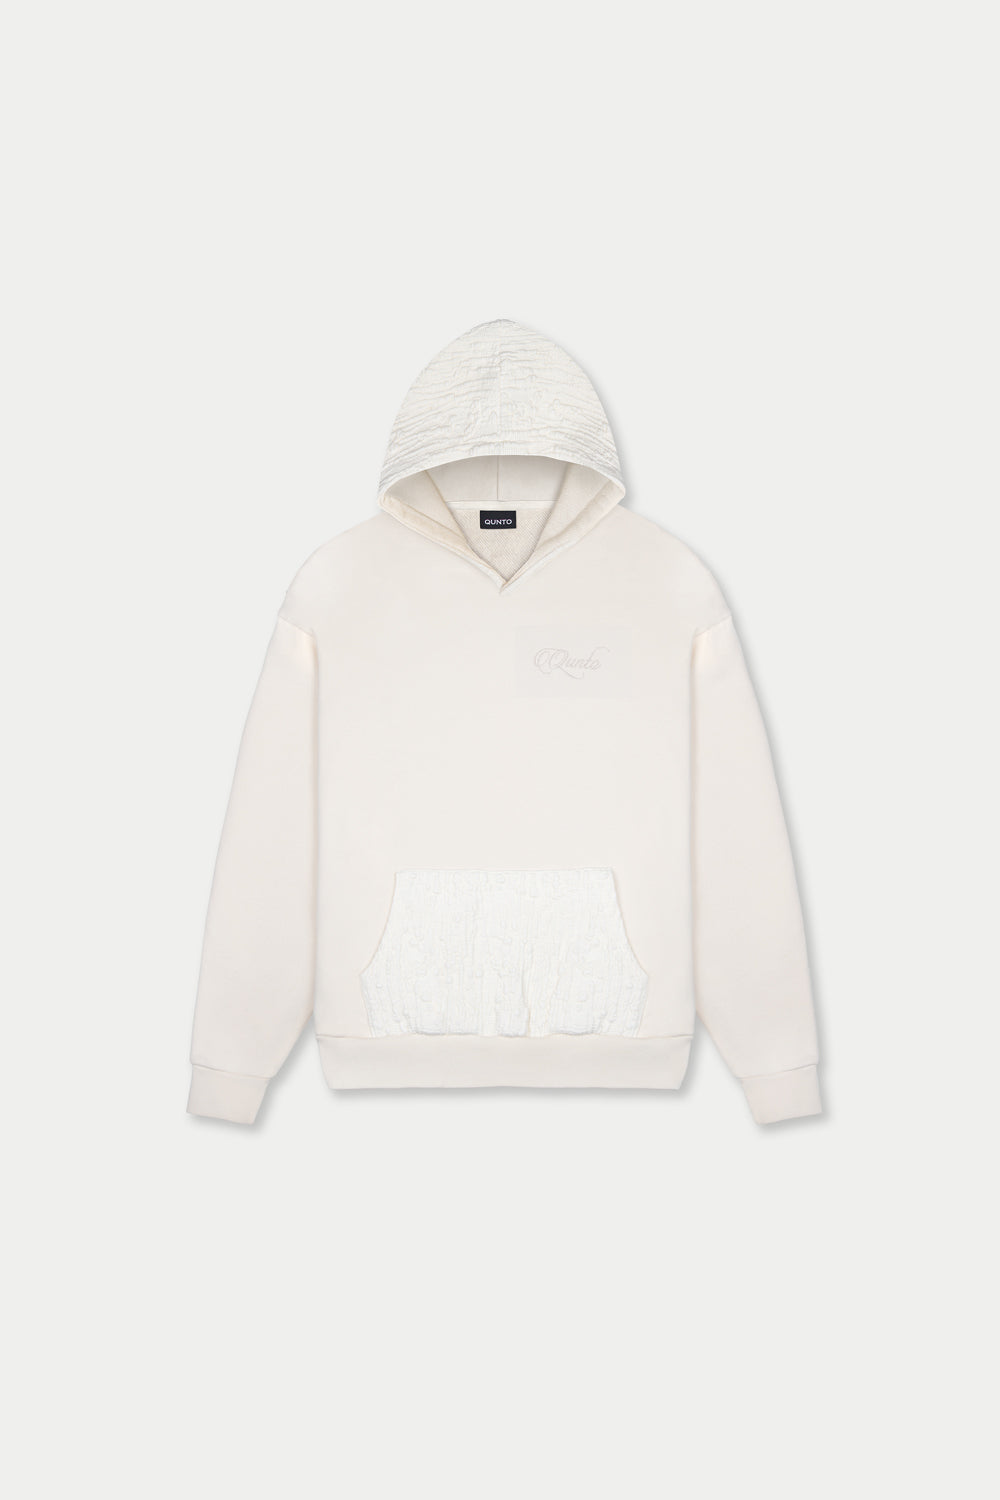 Two Structure Hoodie Cream